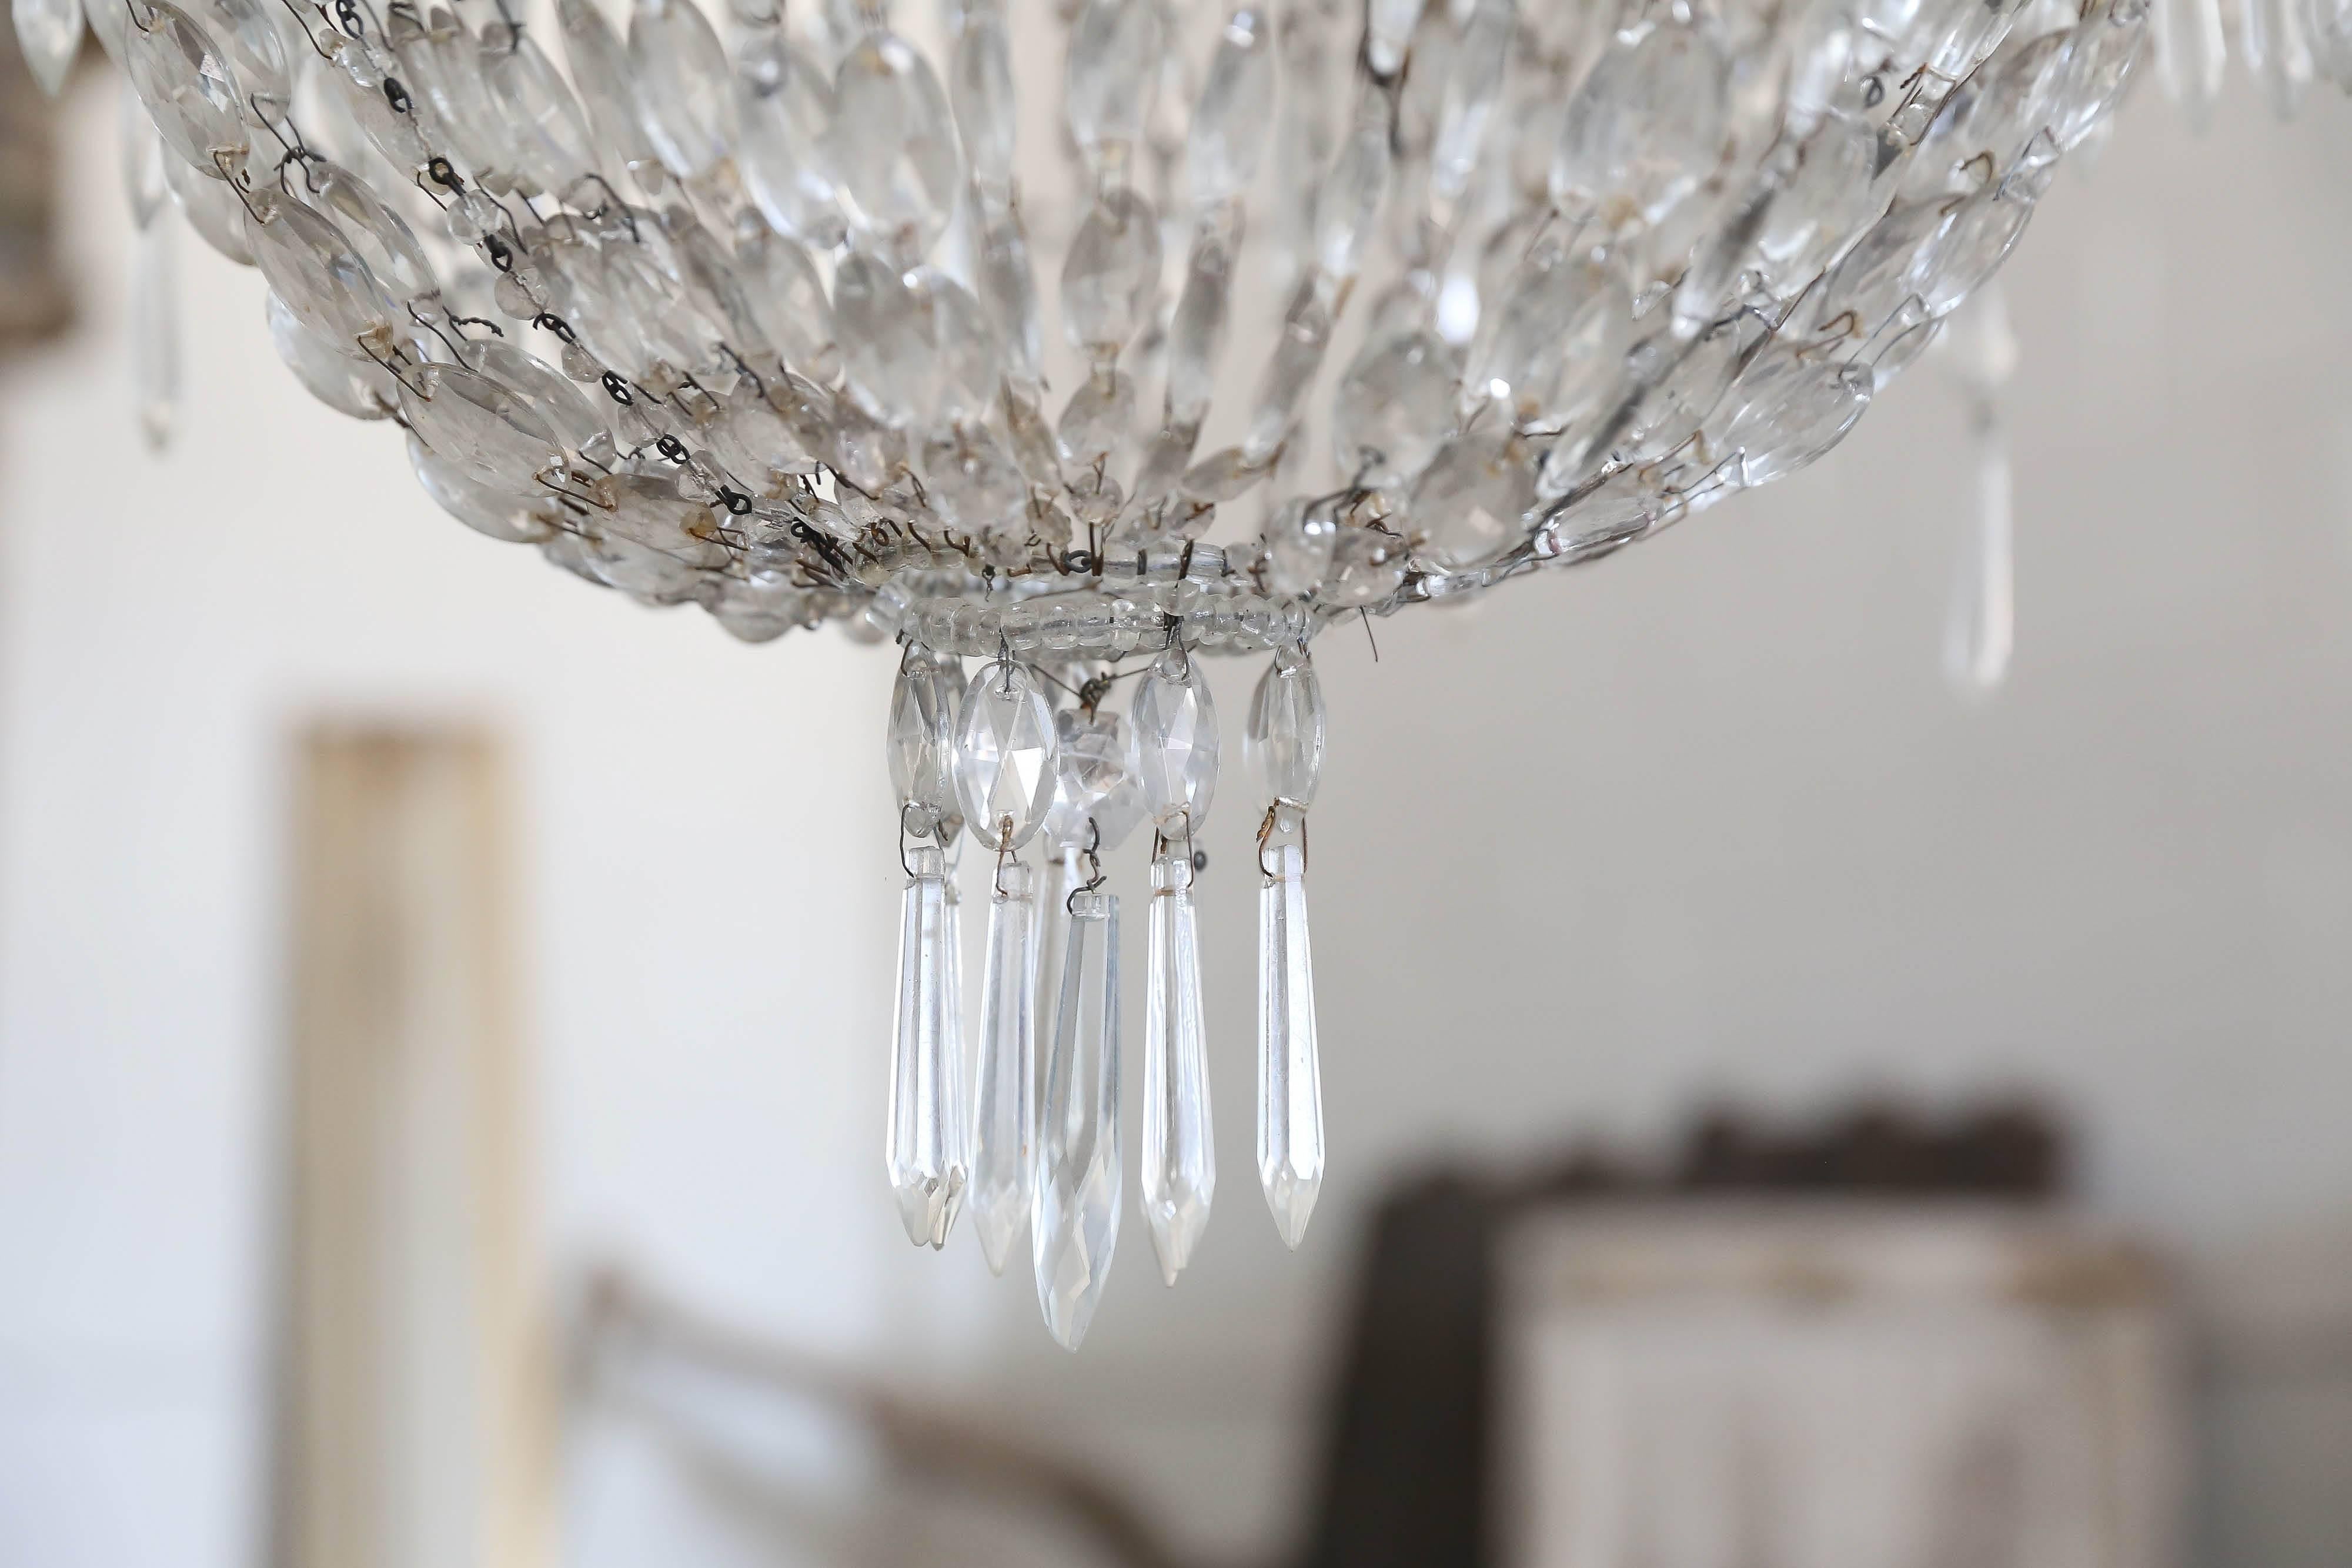 Elegant crystal chandelier from Italy called "Sack of Pearls". Newly wired. It would have held candles.